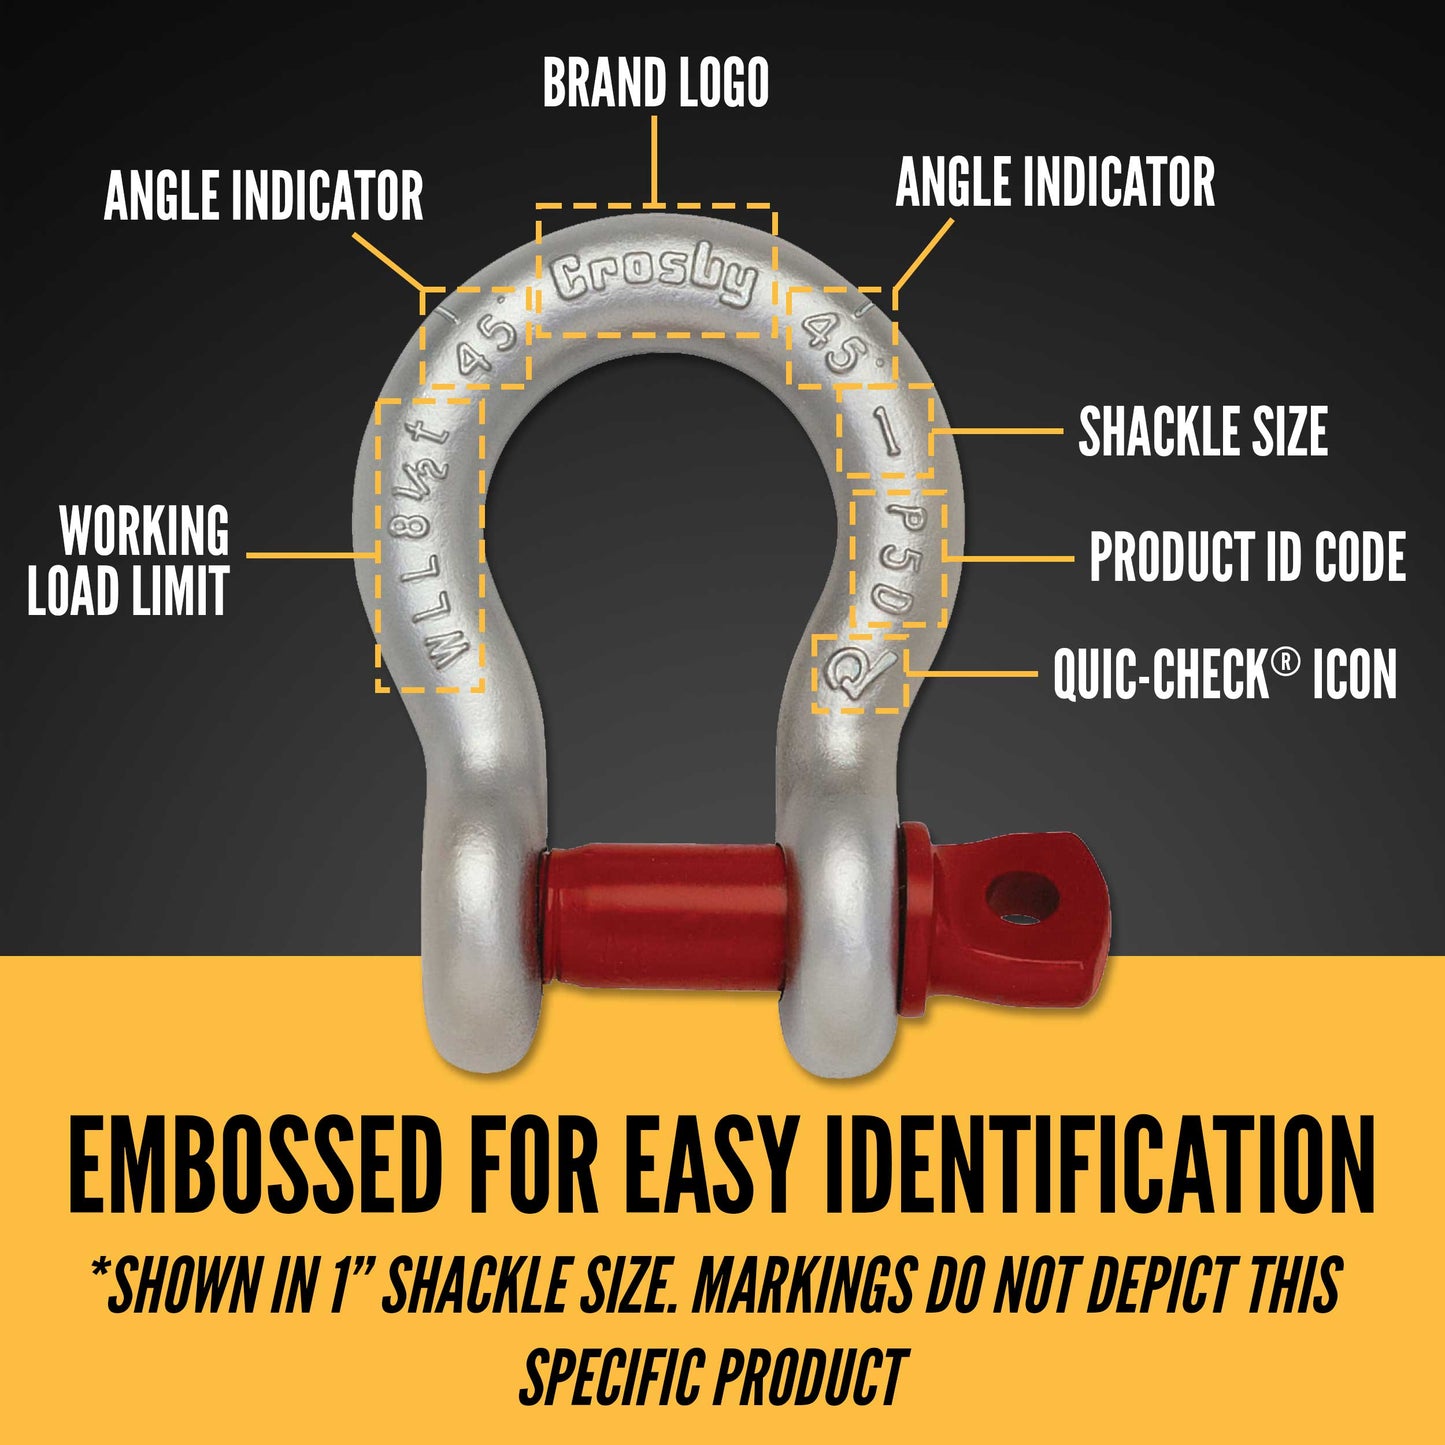 7/16" Crosby® Screw Pin Anchor Shackle | G-209 - 1.5 Ton embossed for easy identification